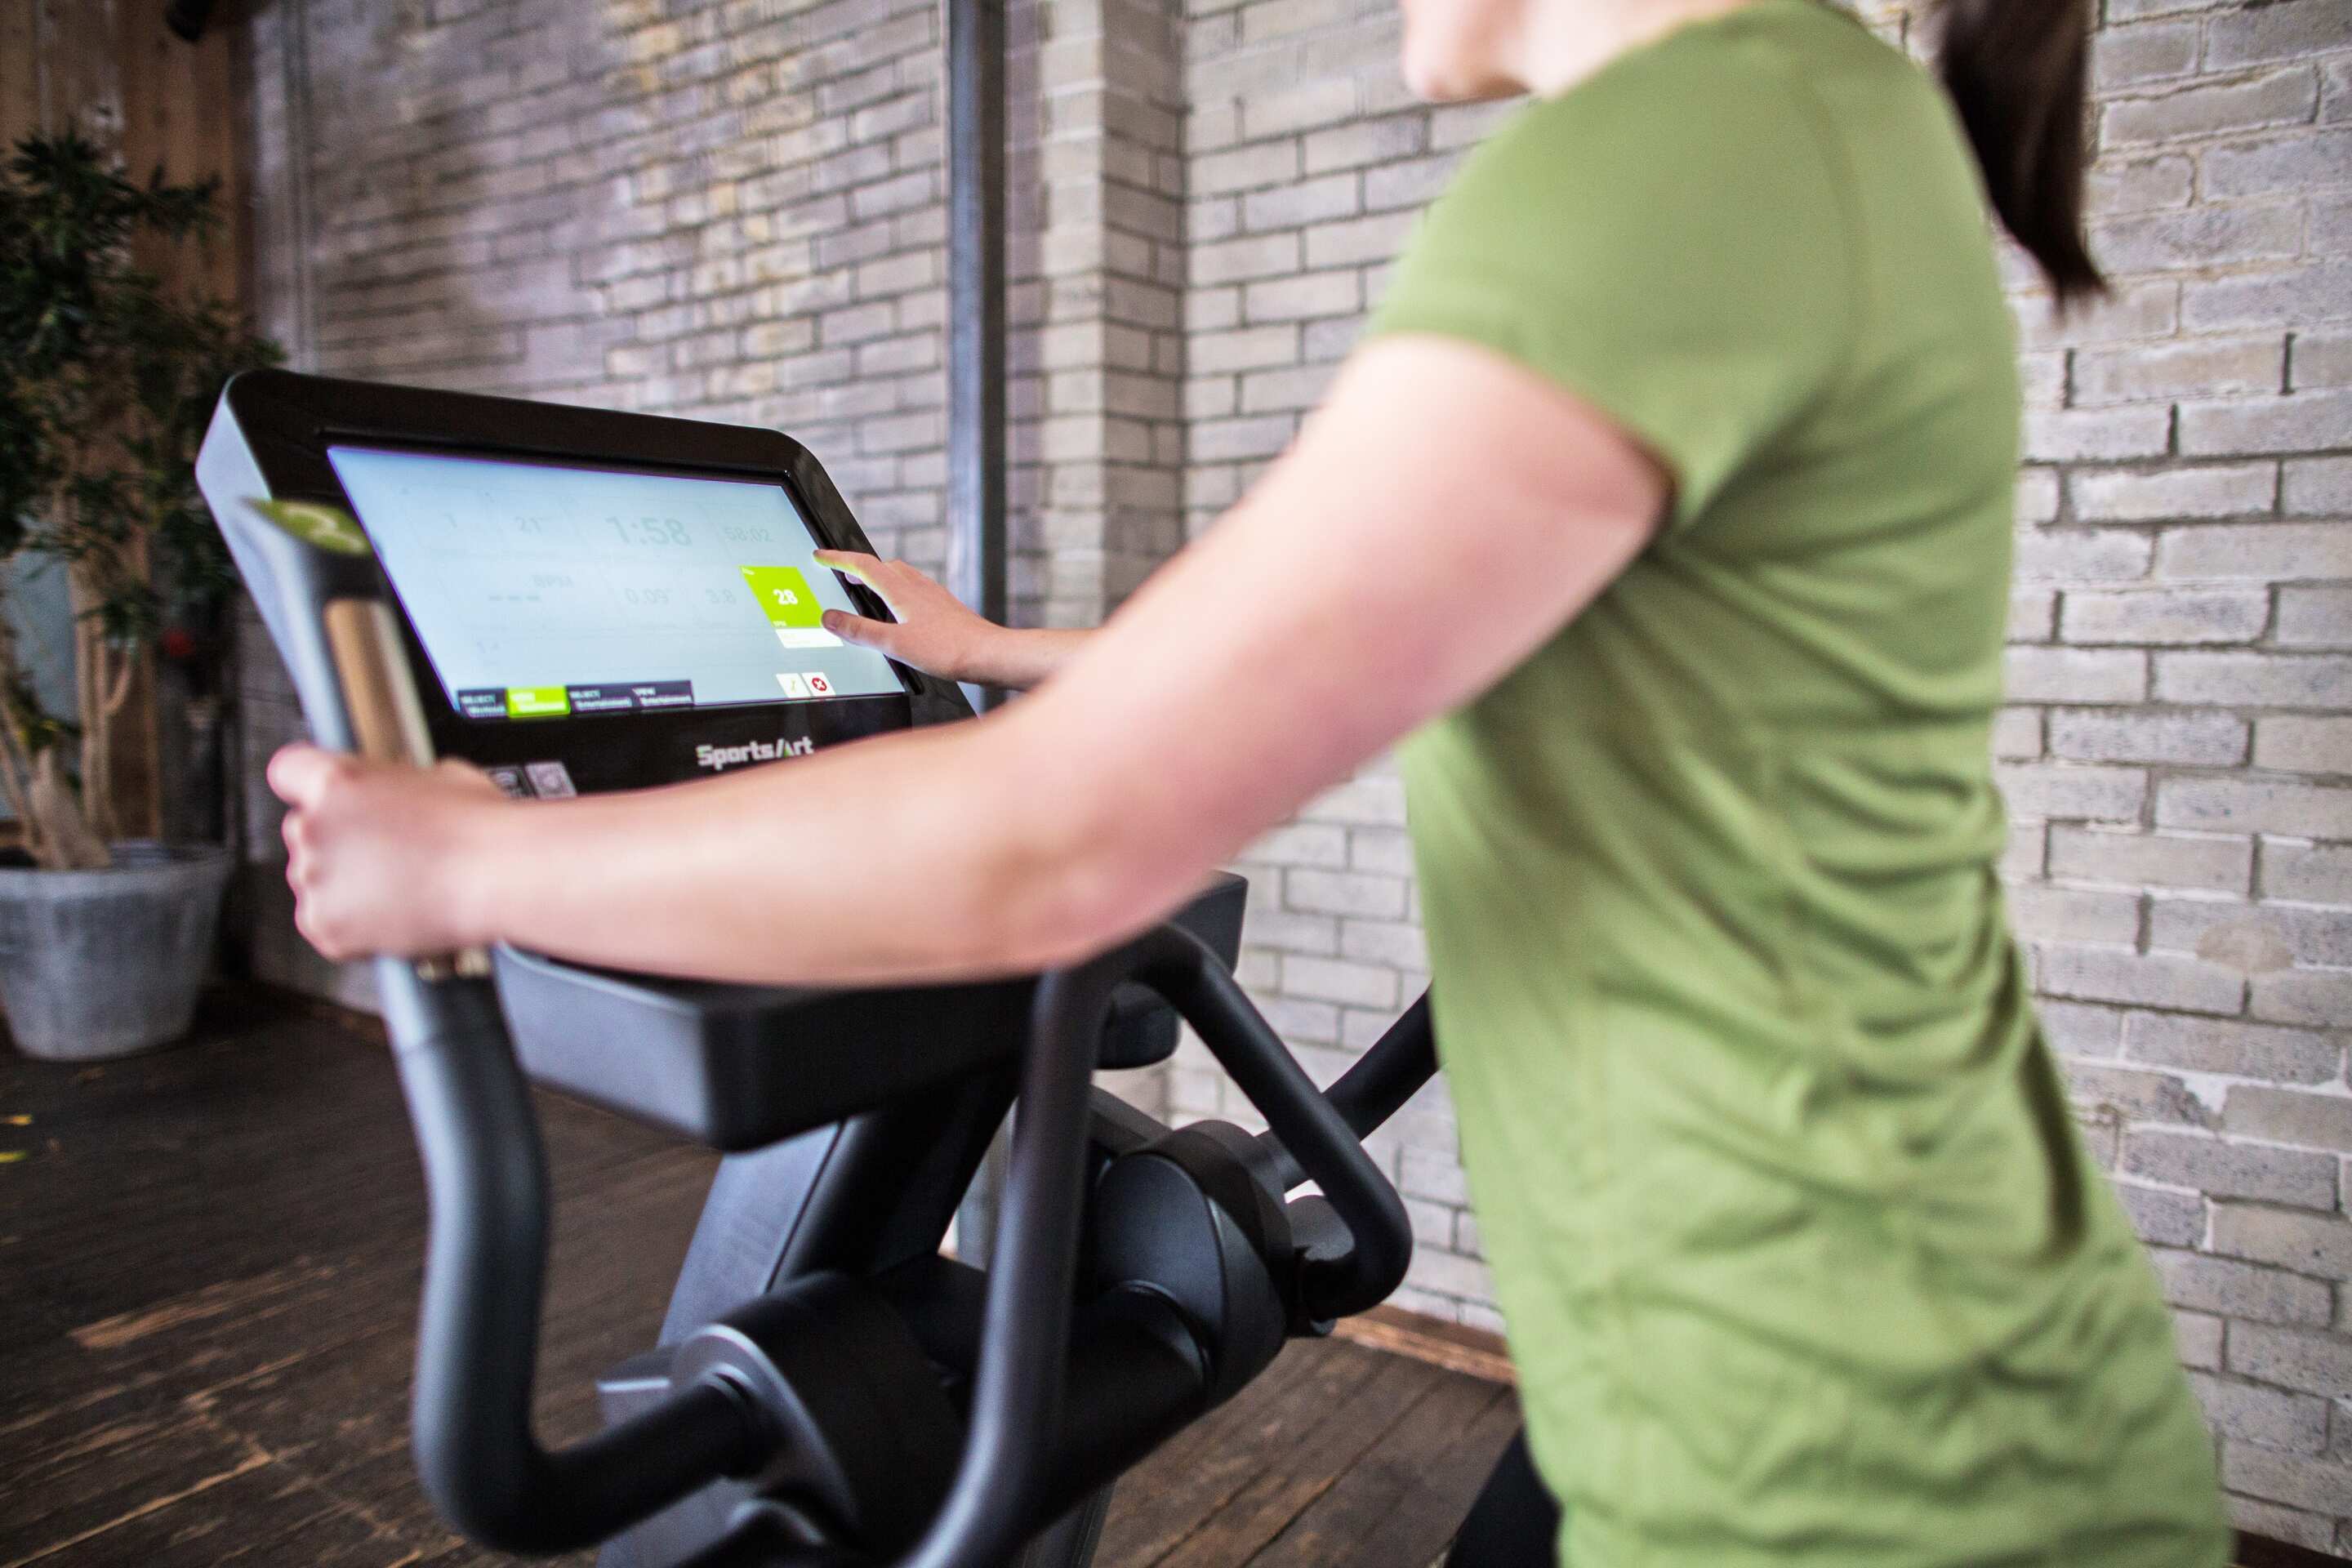 SportsArt Status Senza Elliptical-16 inch - E876-16 user interacting with the touch screen console 